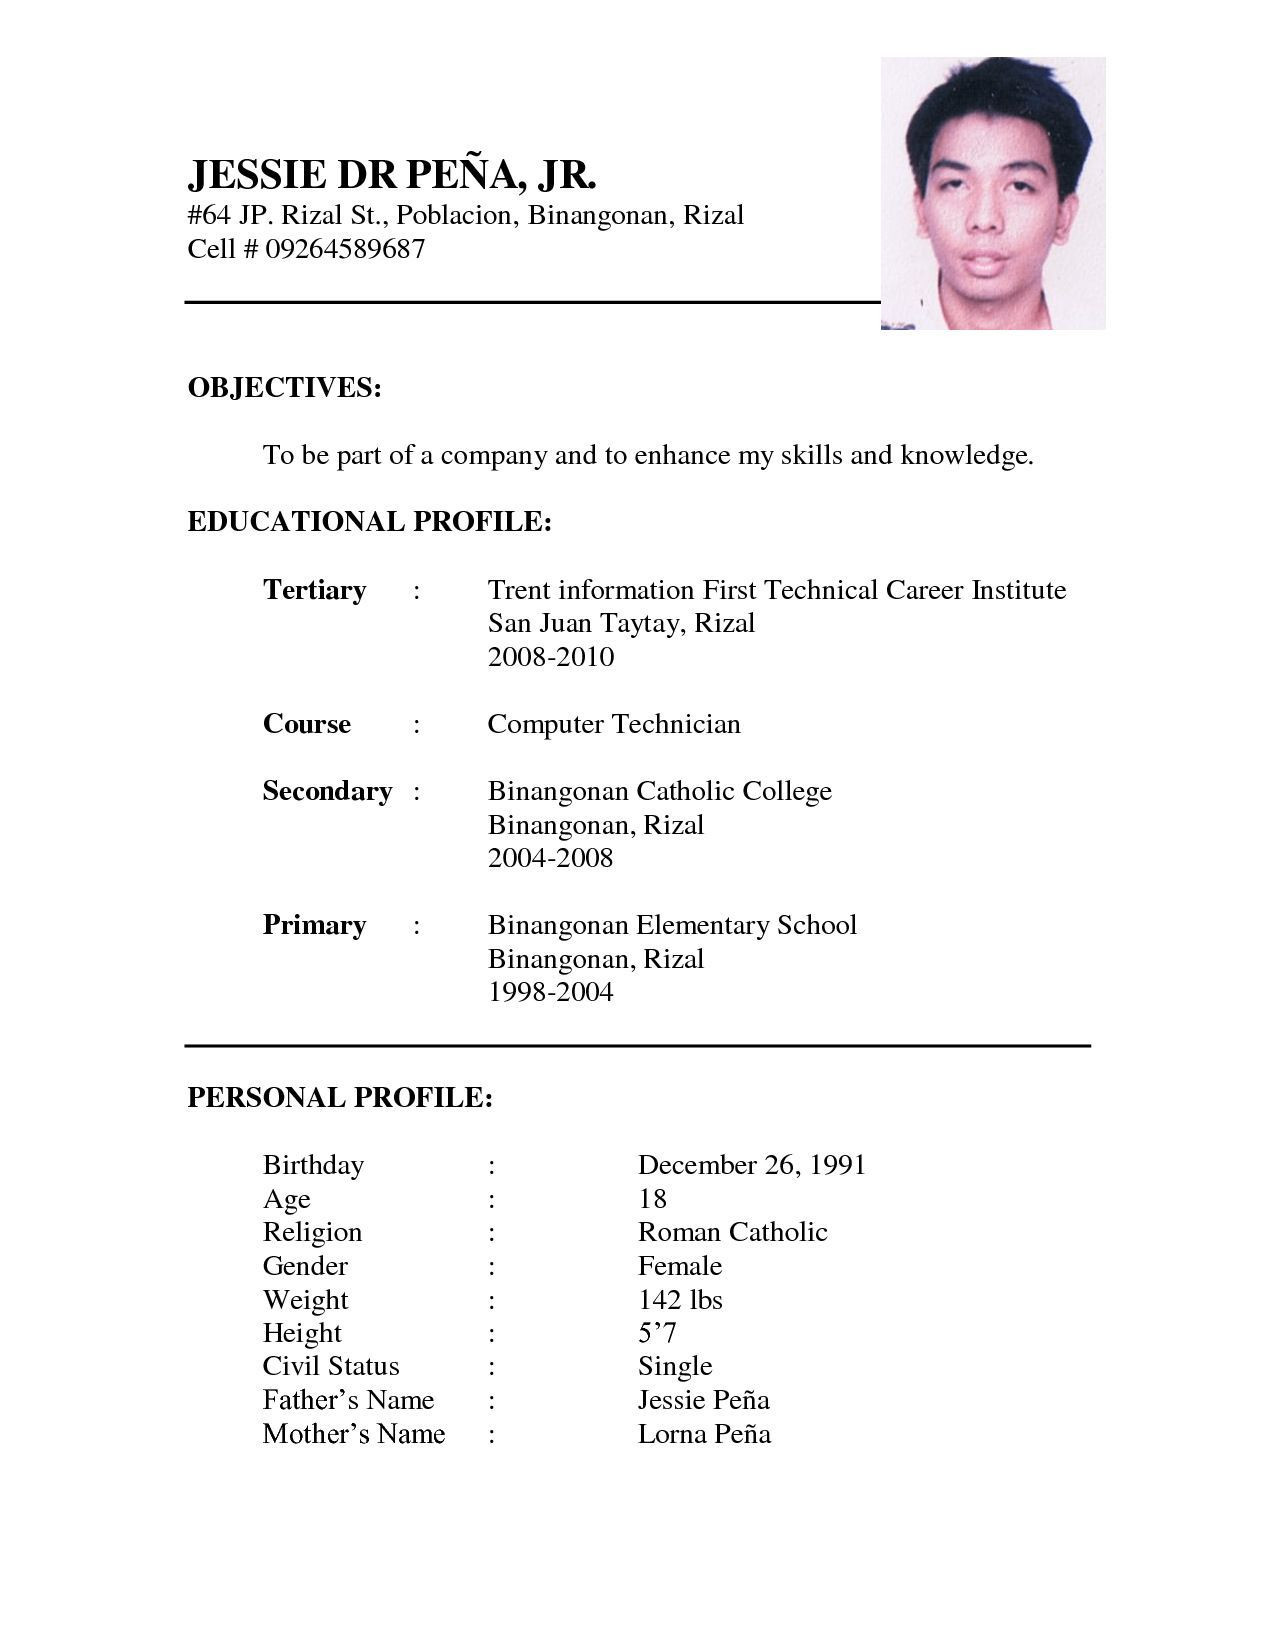 Sample Of Simple Resume for Job Application Resume Examples Doc – Resume Examples Job Resume format, Resume …